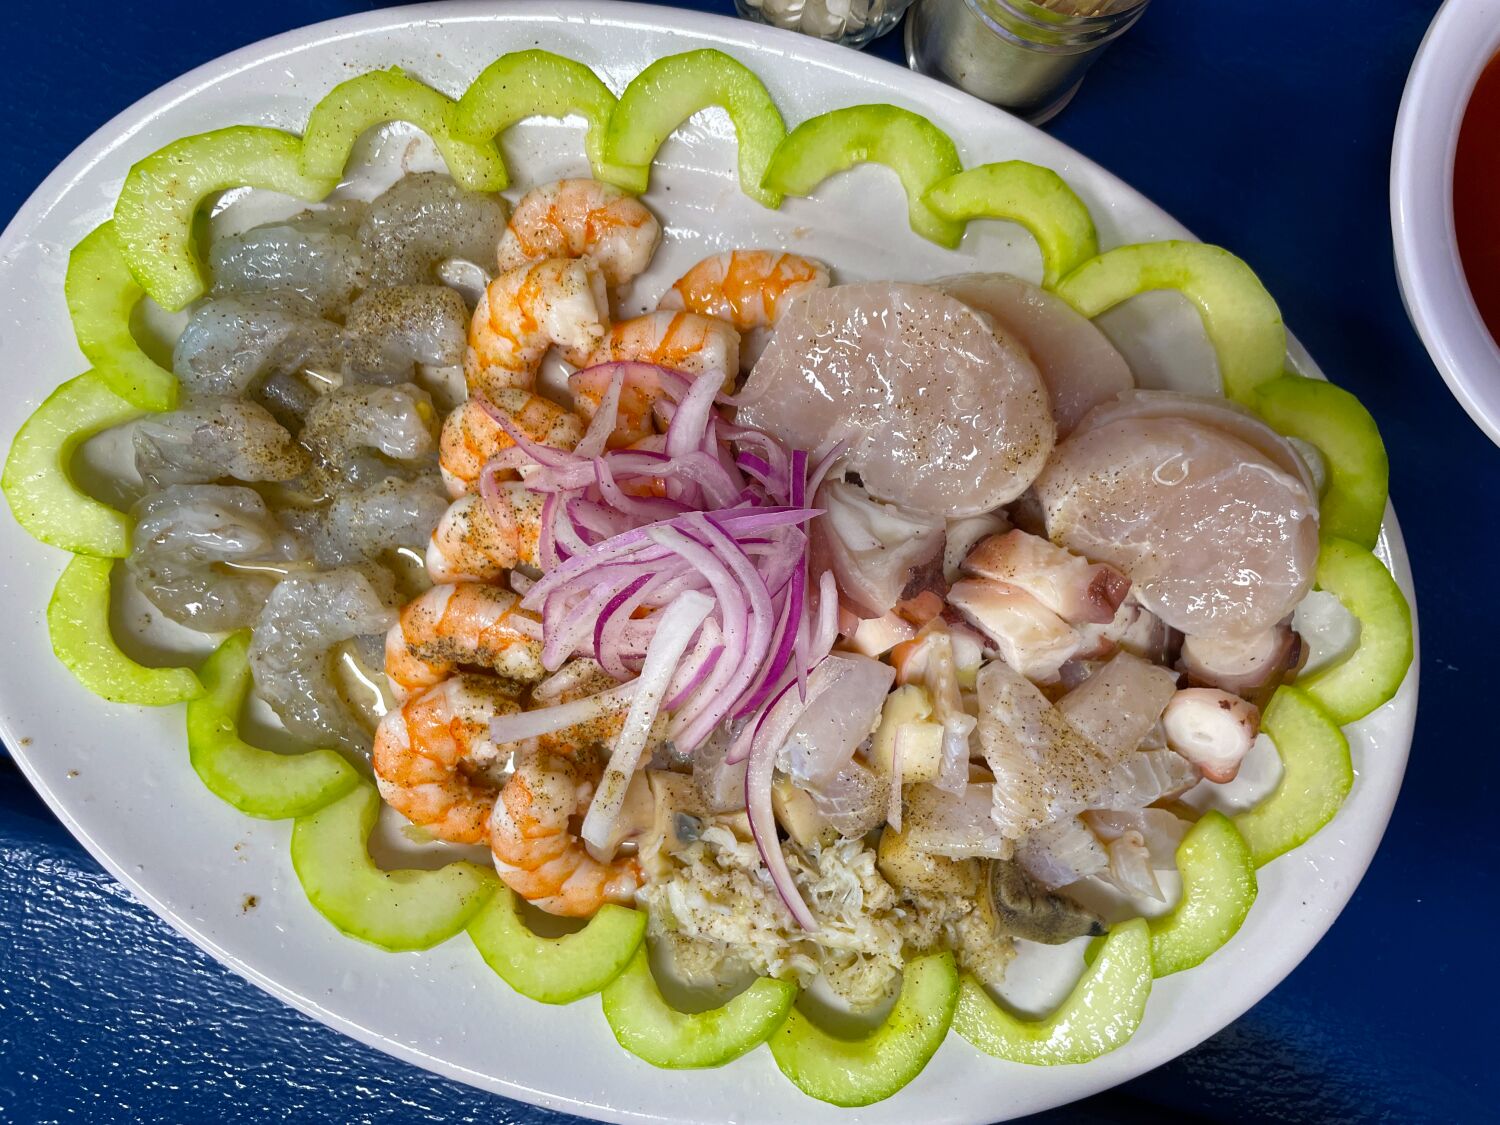 Two new places to get your mariscos fix